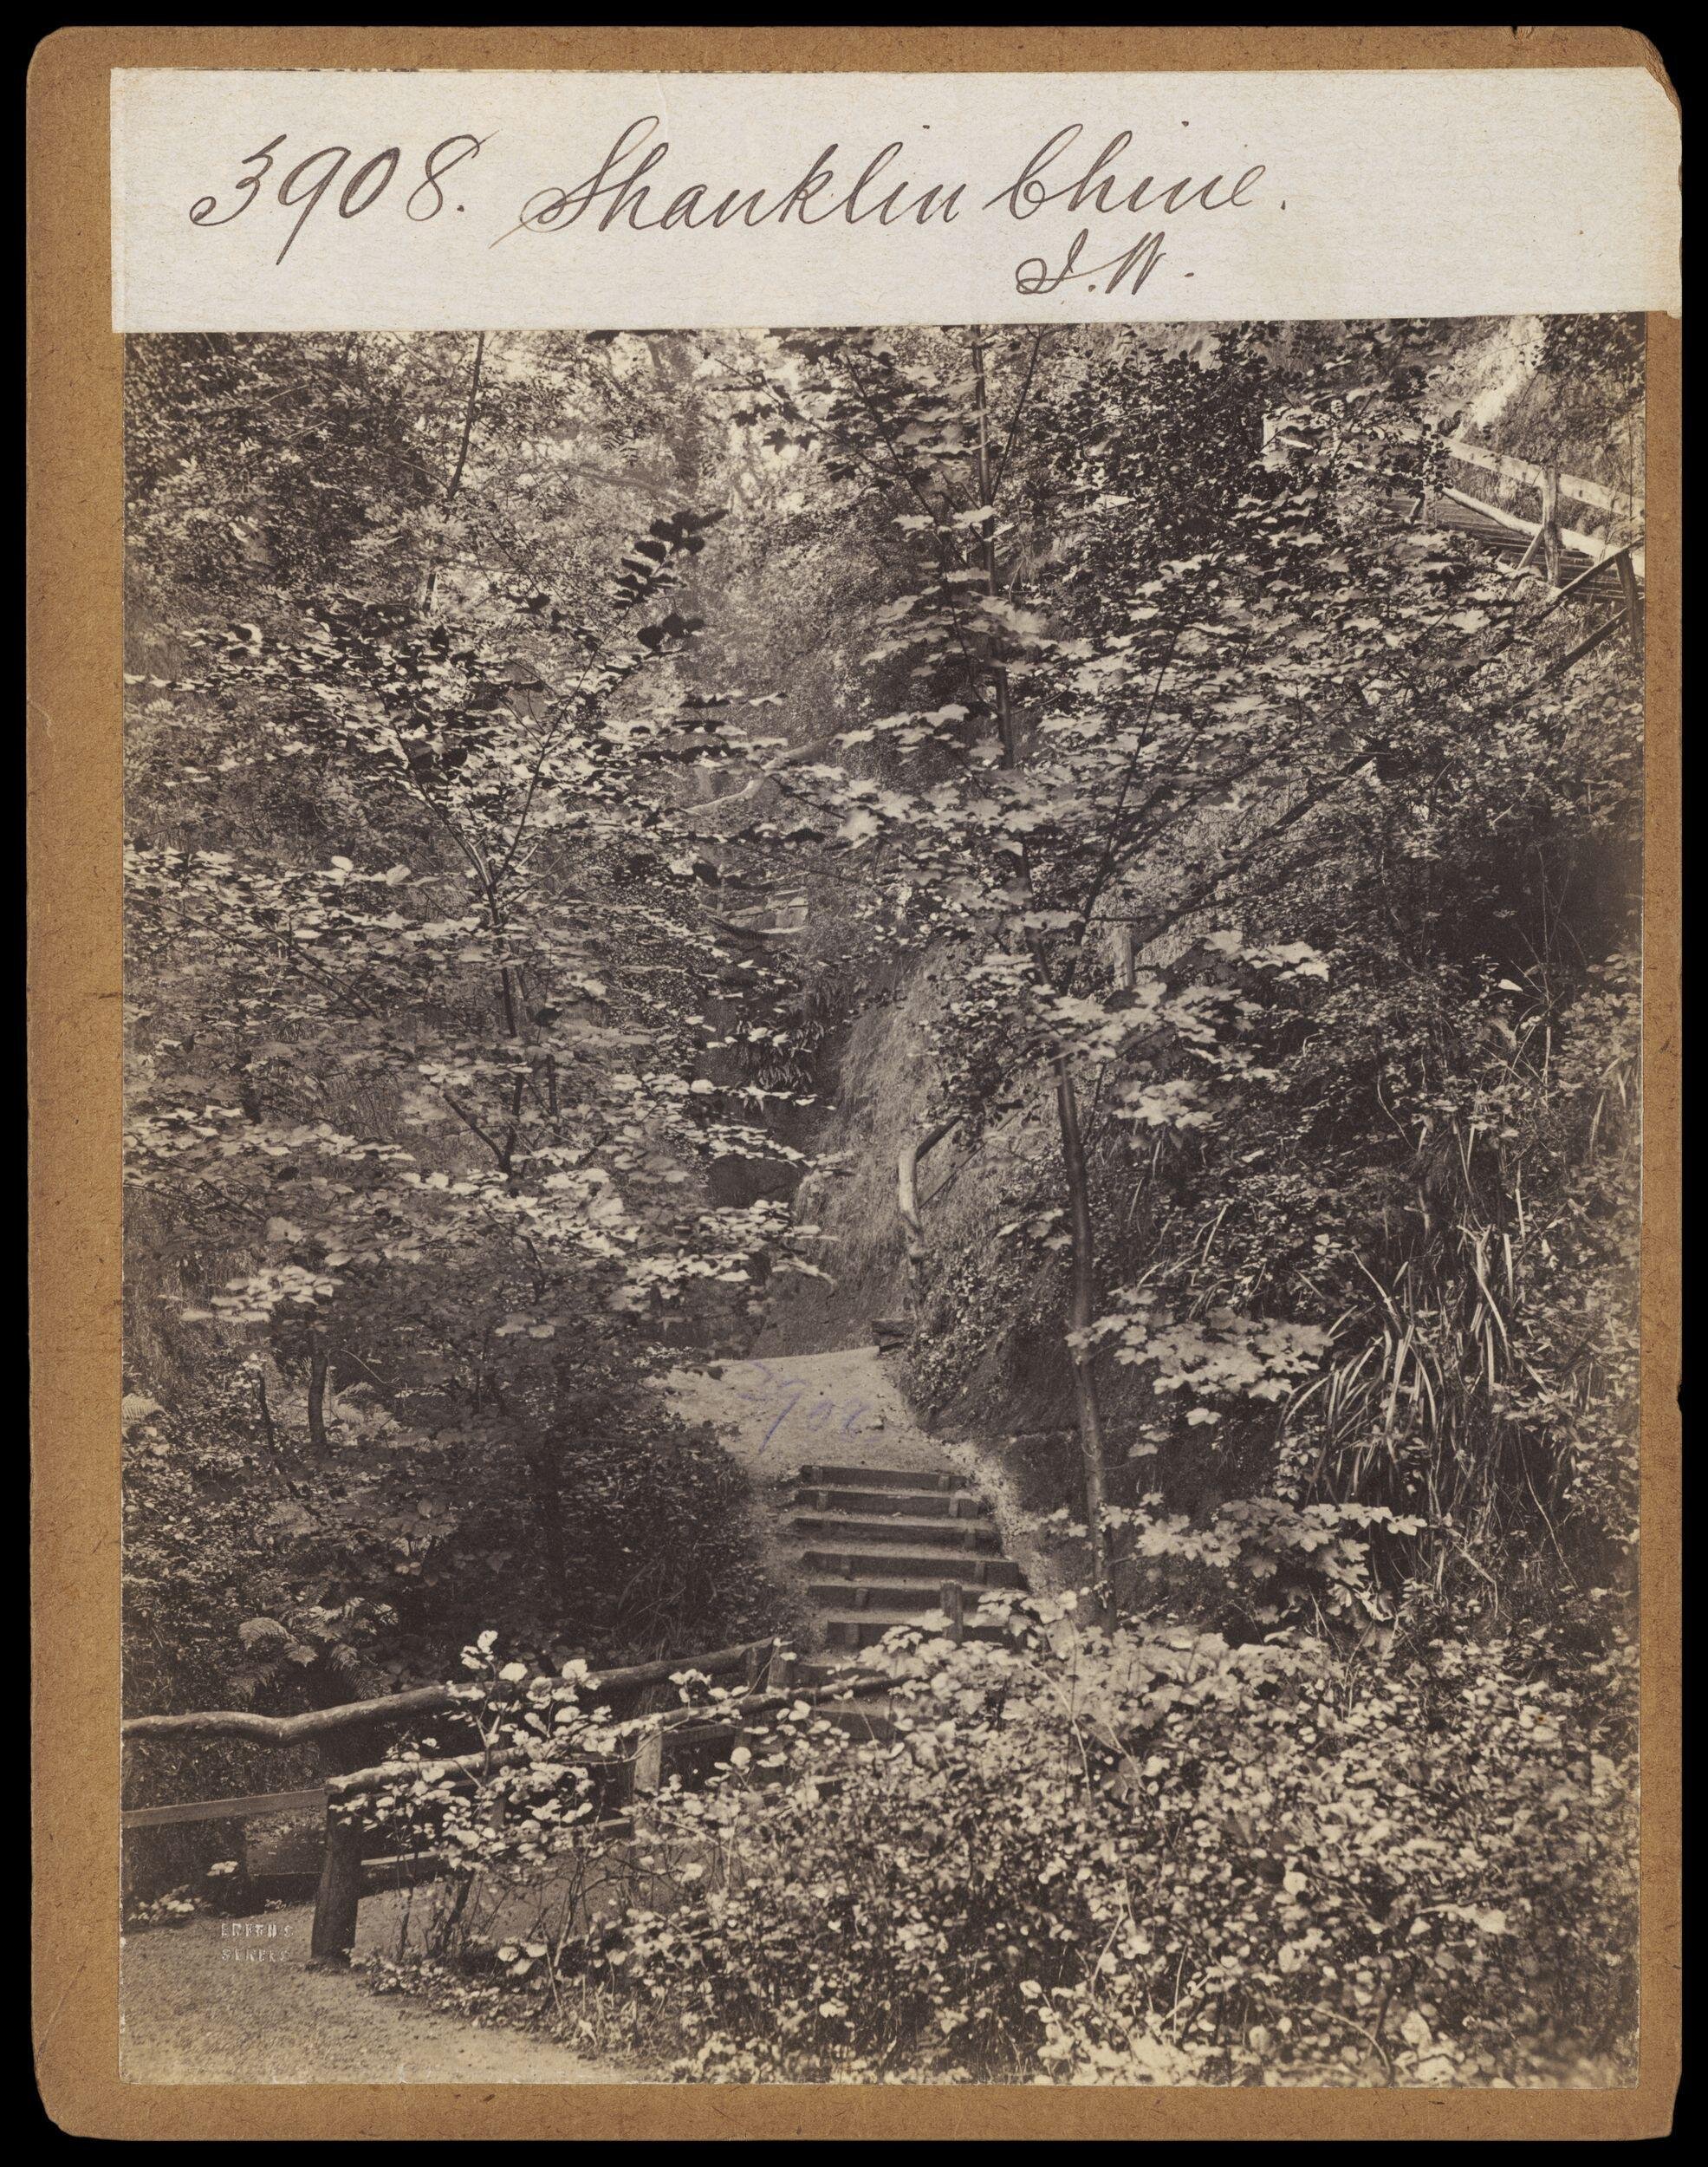 ***Photograph by Francis Frith; part of the Shanklin Chine path, c.1860 (Victoria
        and Albert Museum E.208:3190-1994). Click to enlarge.